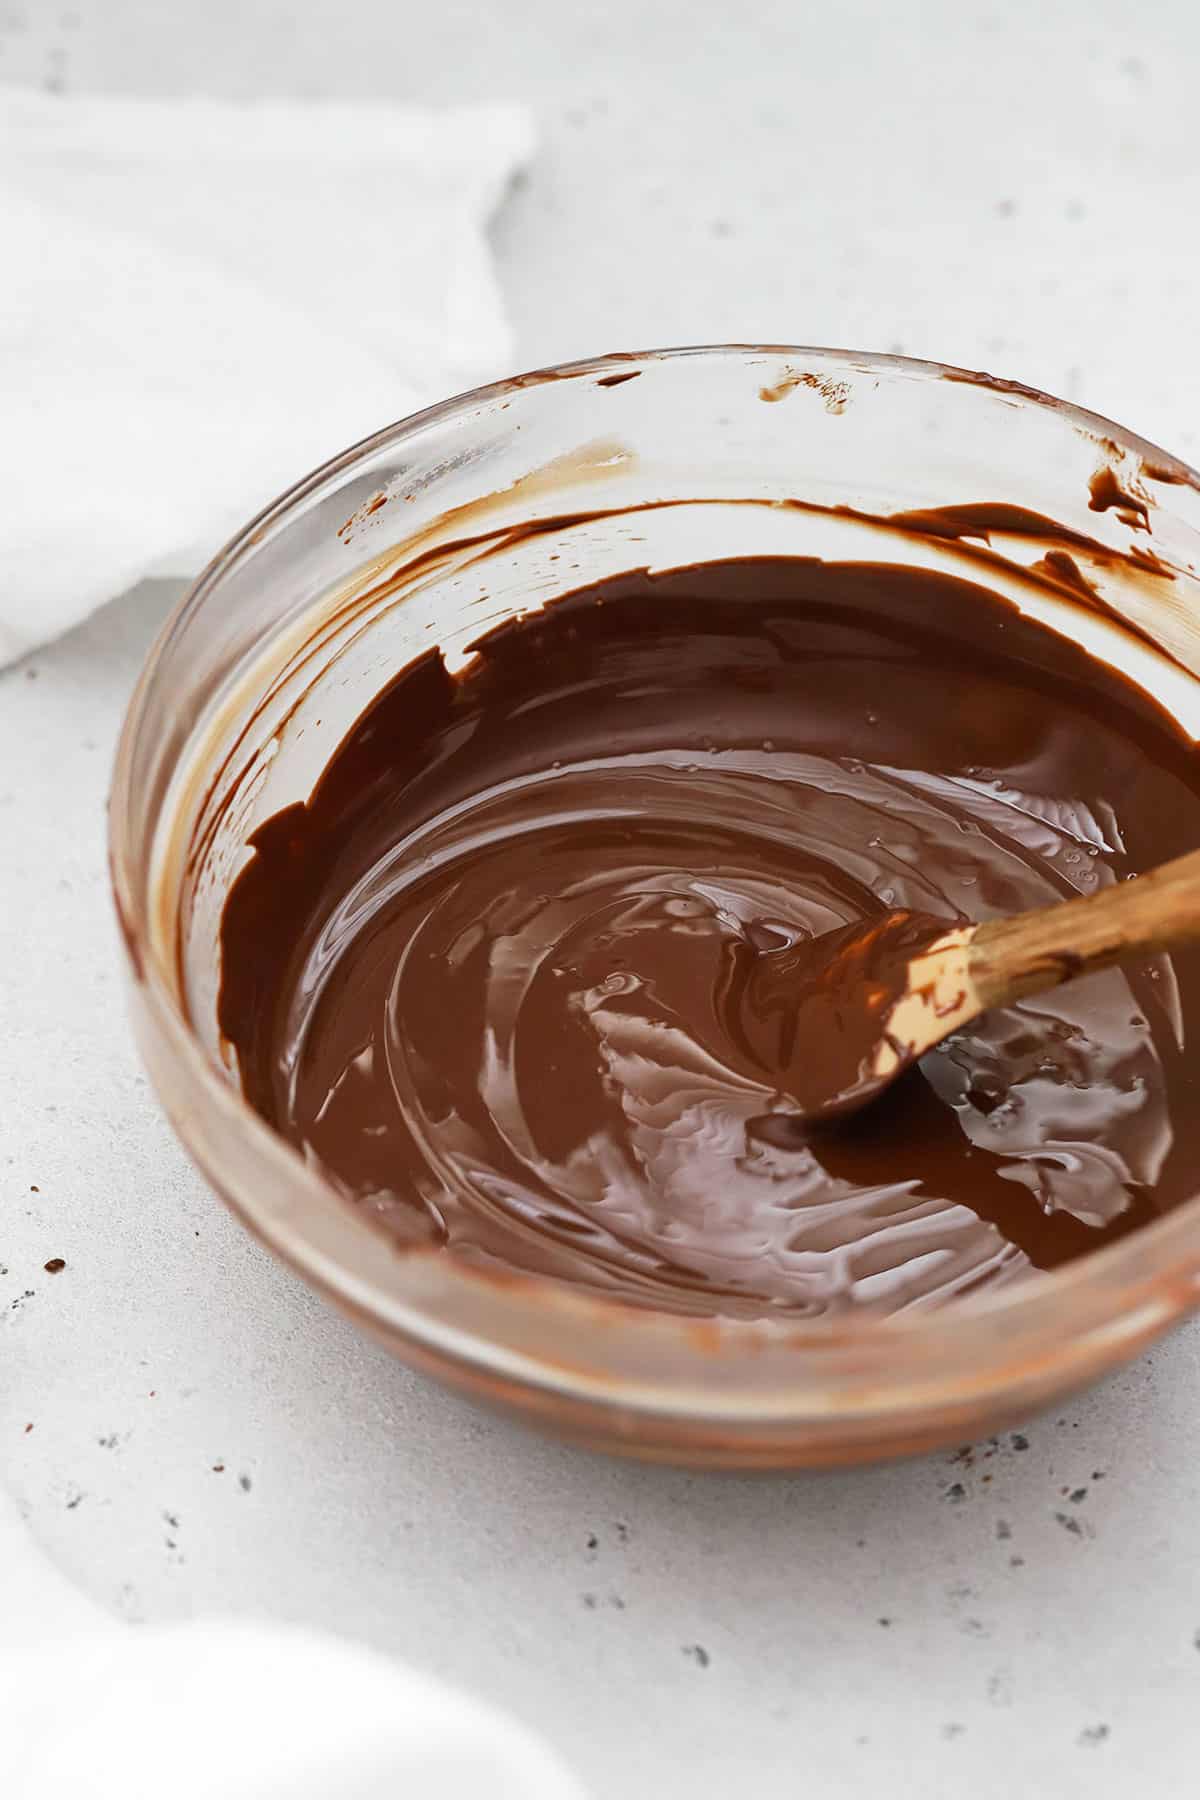 Tempered chocolate in a glass bowl